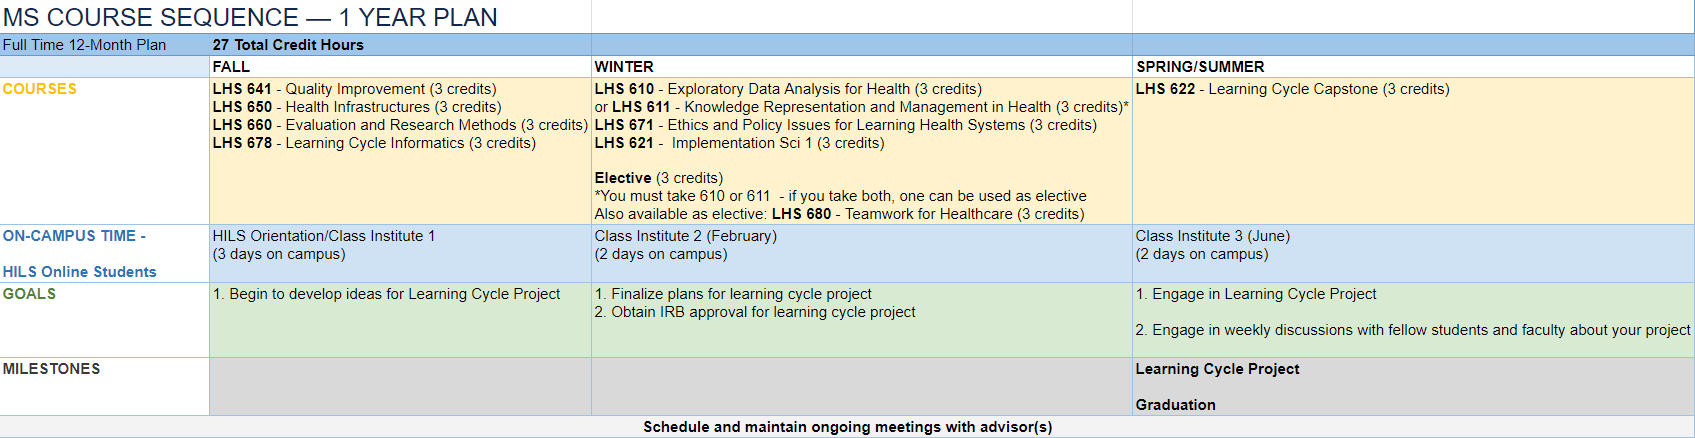 HILS MS Course Sequence on the 1-year plan